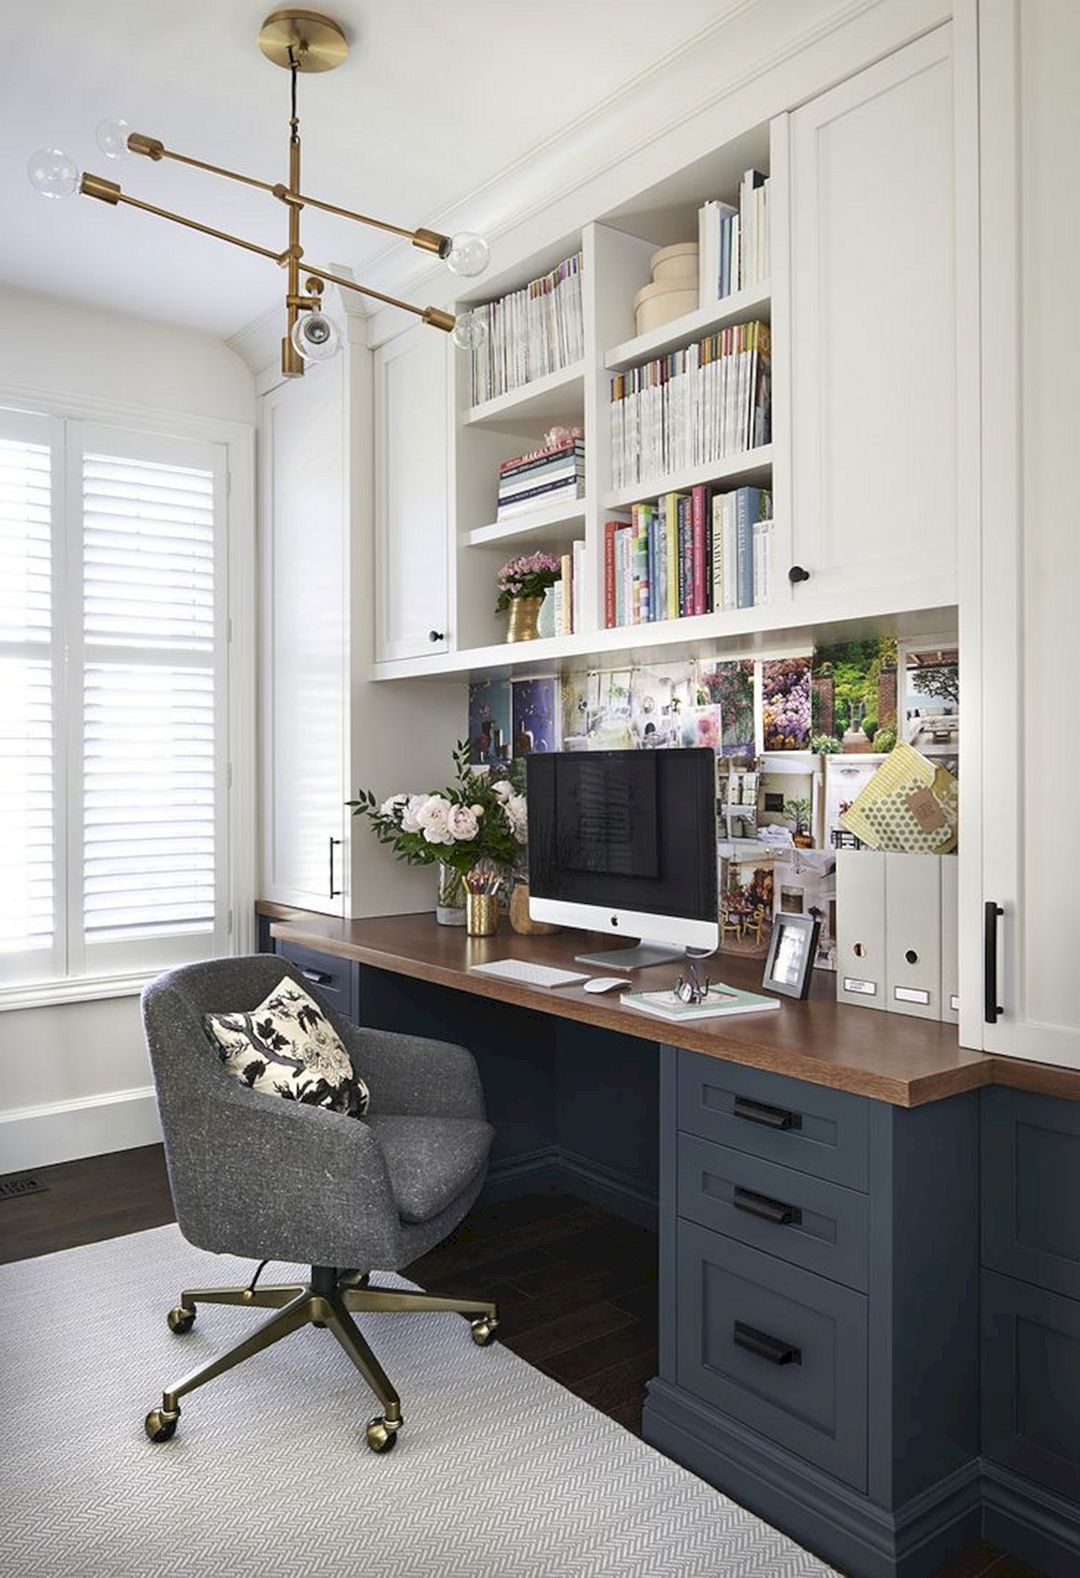 Home Office Study Room Designs 11 Home Office Study Room Designs 11 design ideas and photos